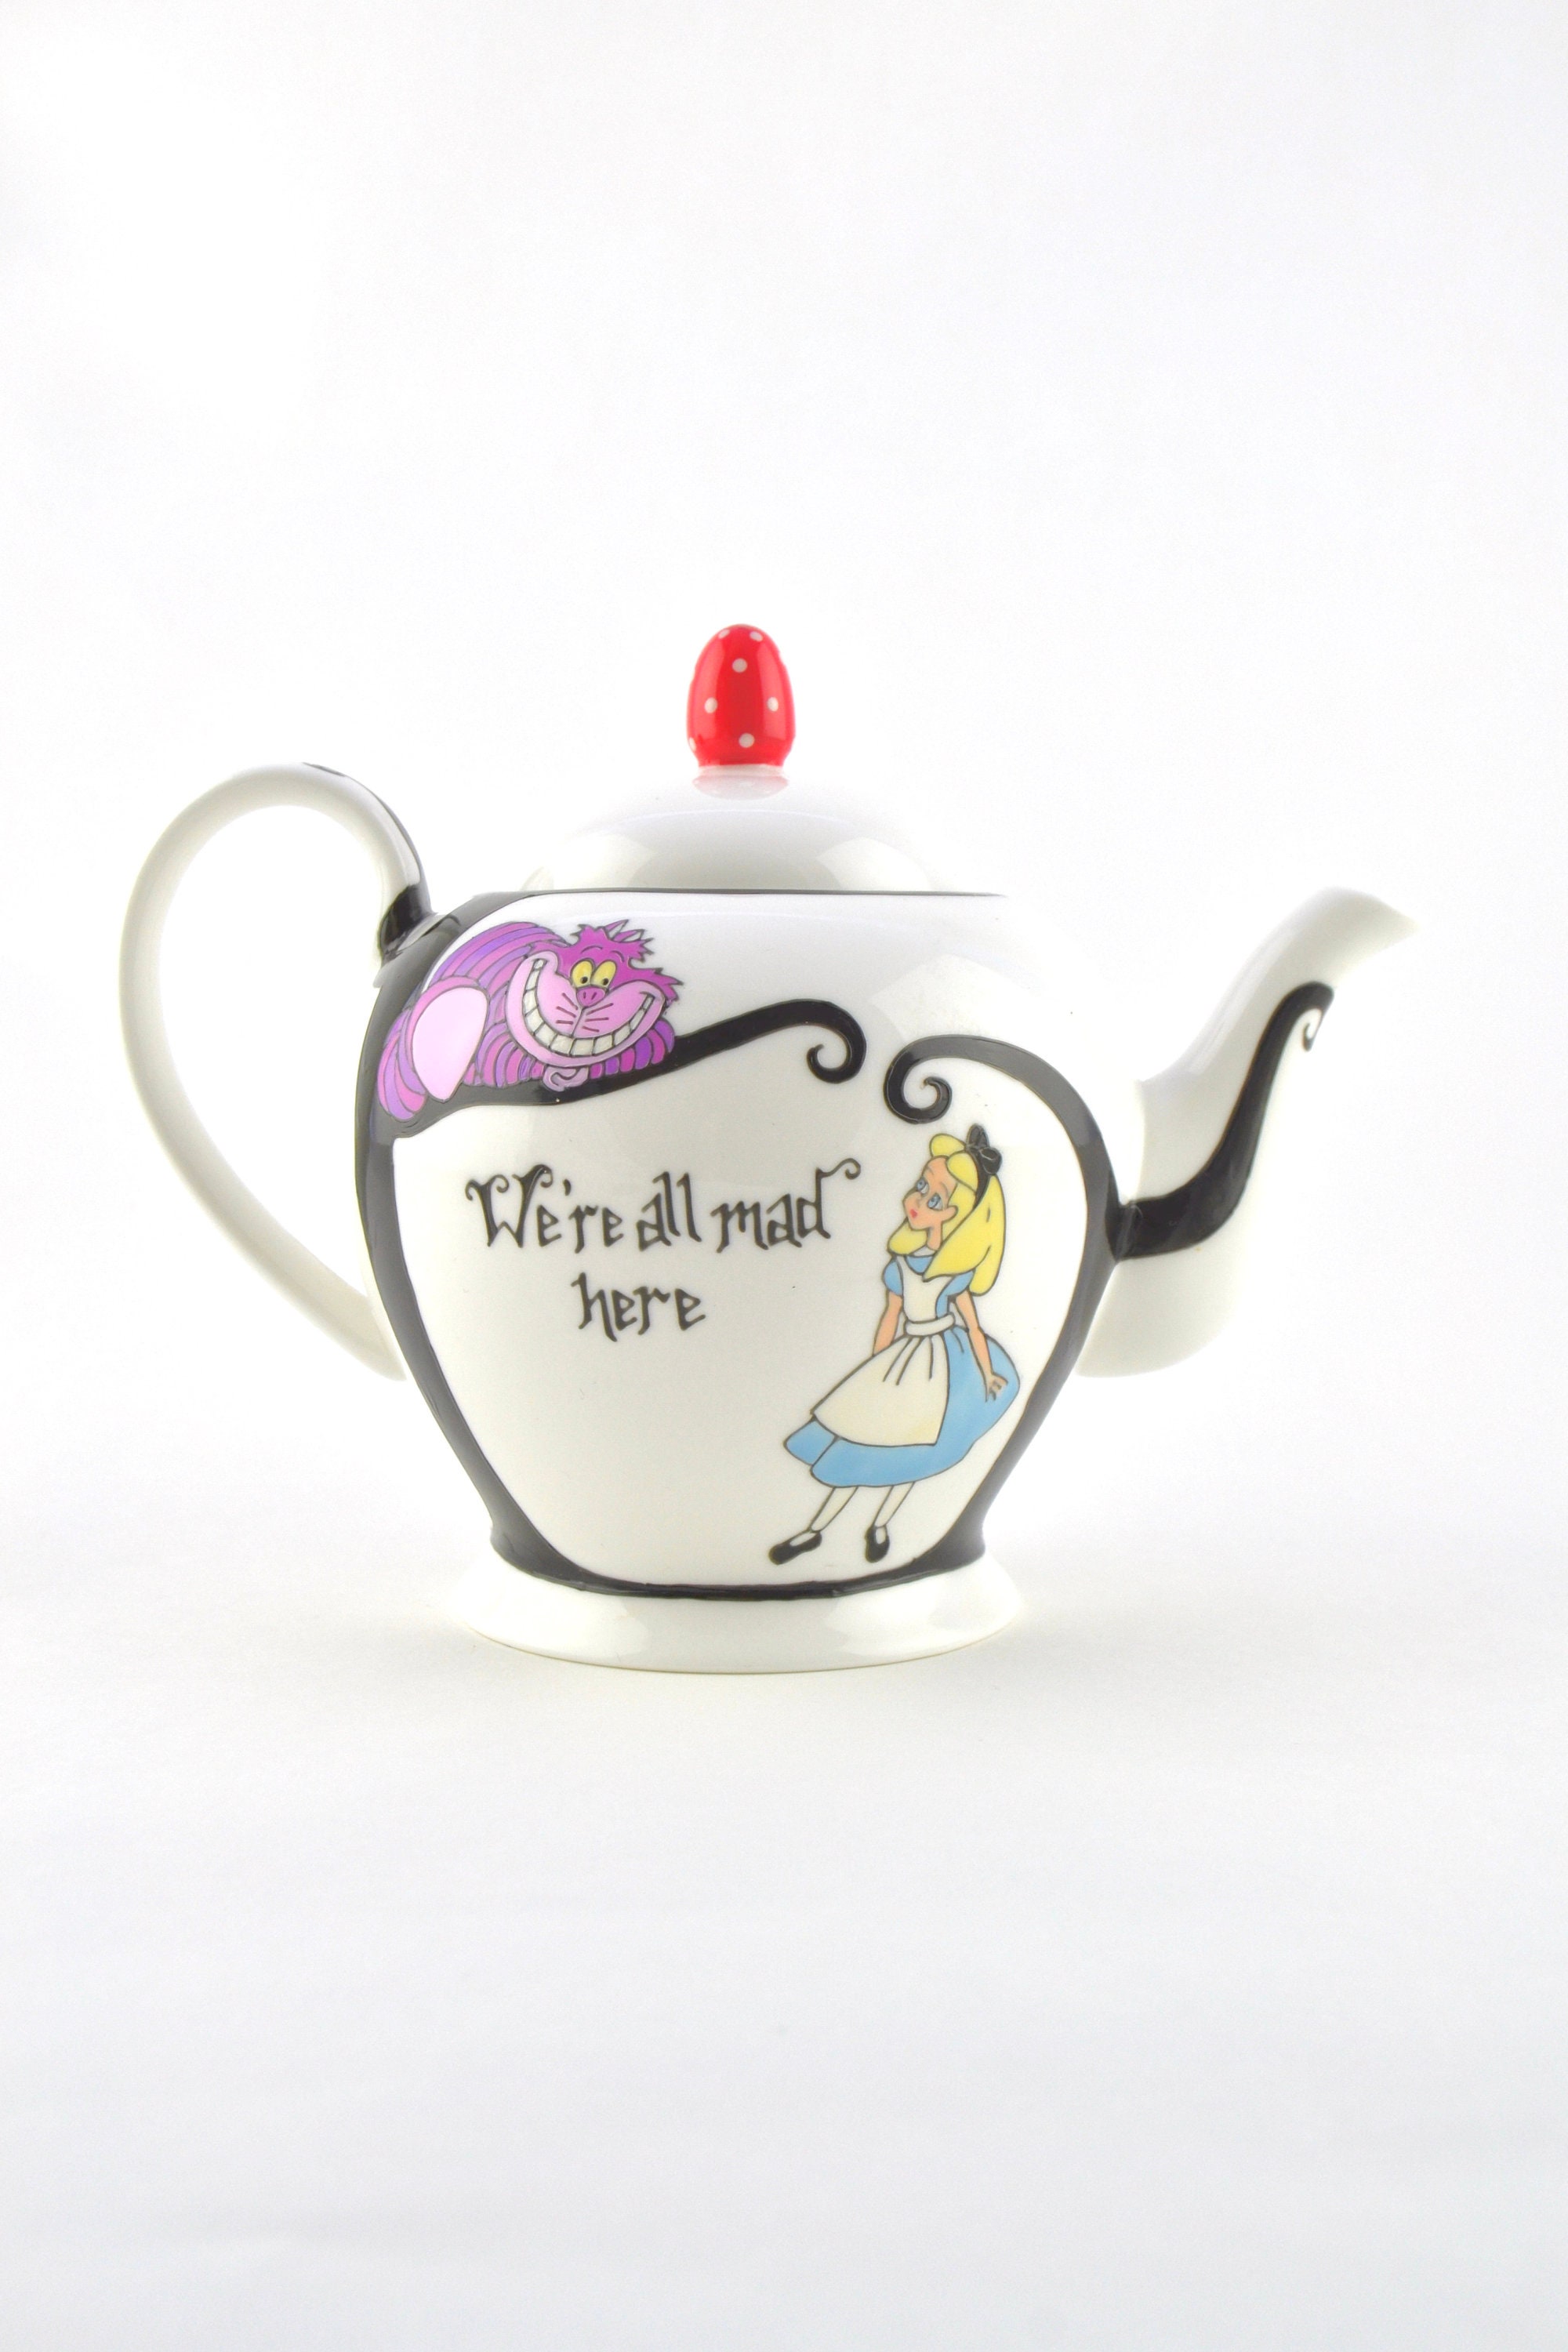 Alice in Wonderland Teapot - Tea and Whimsey